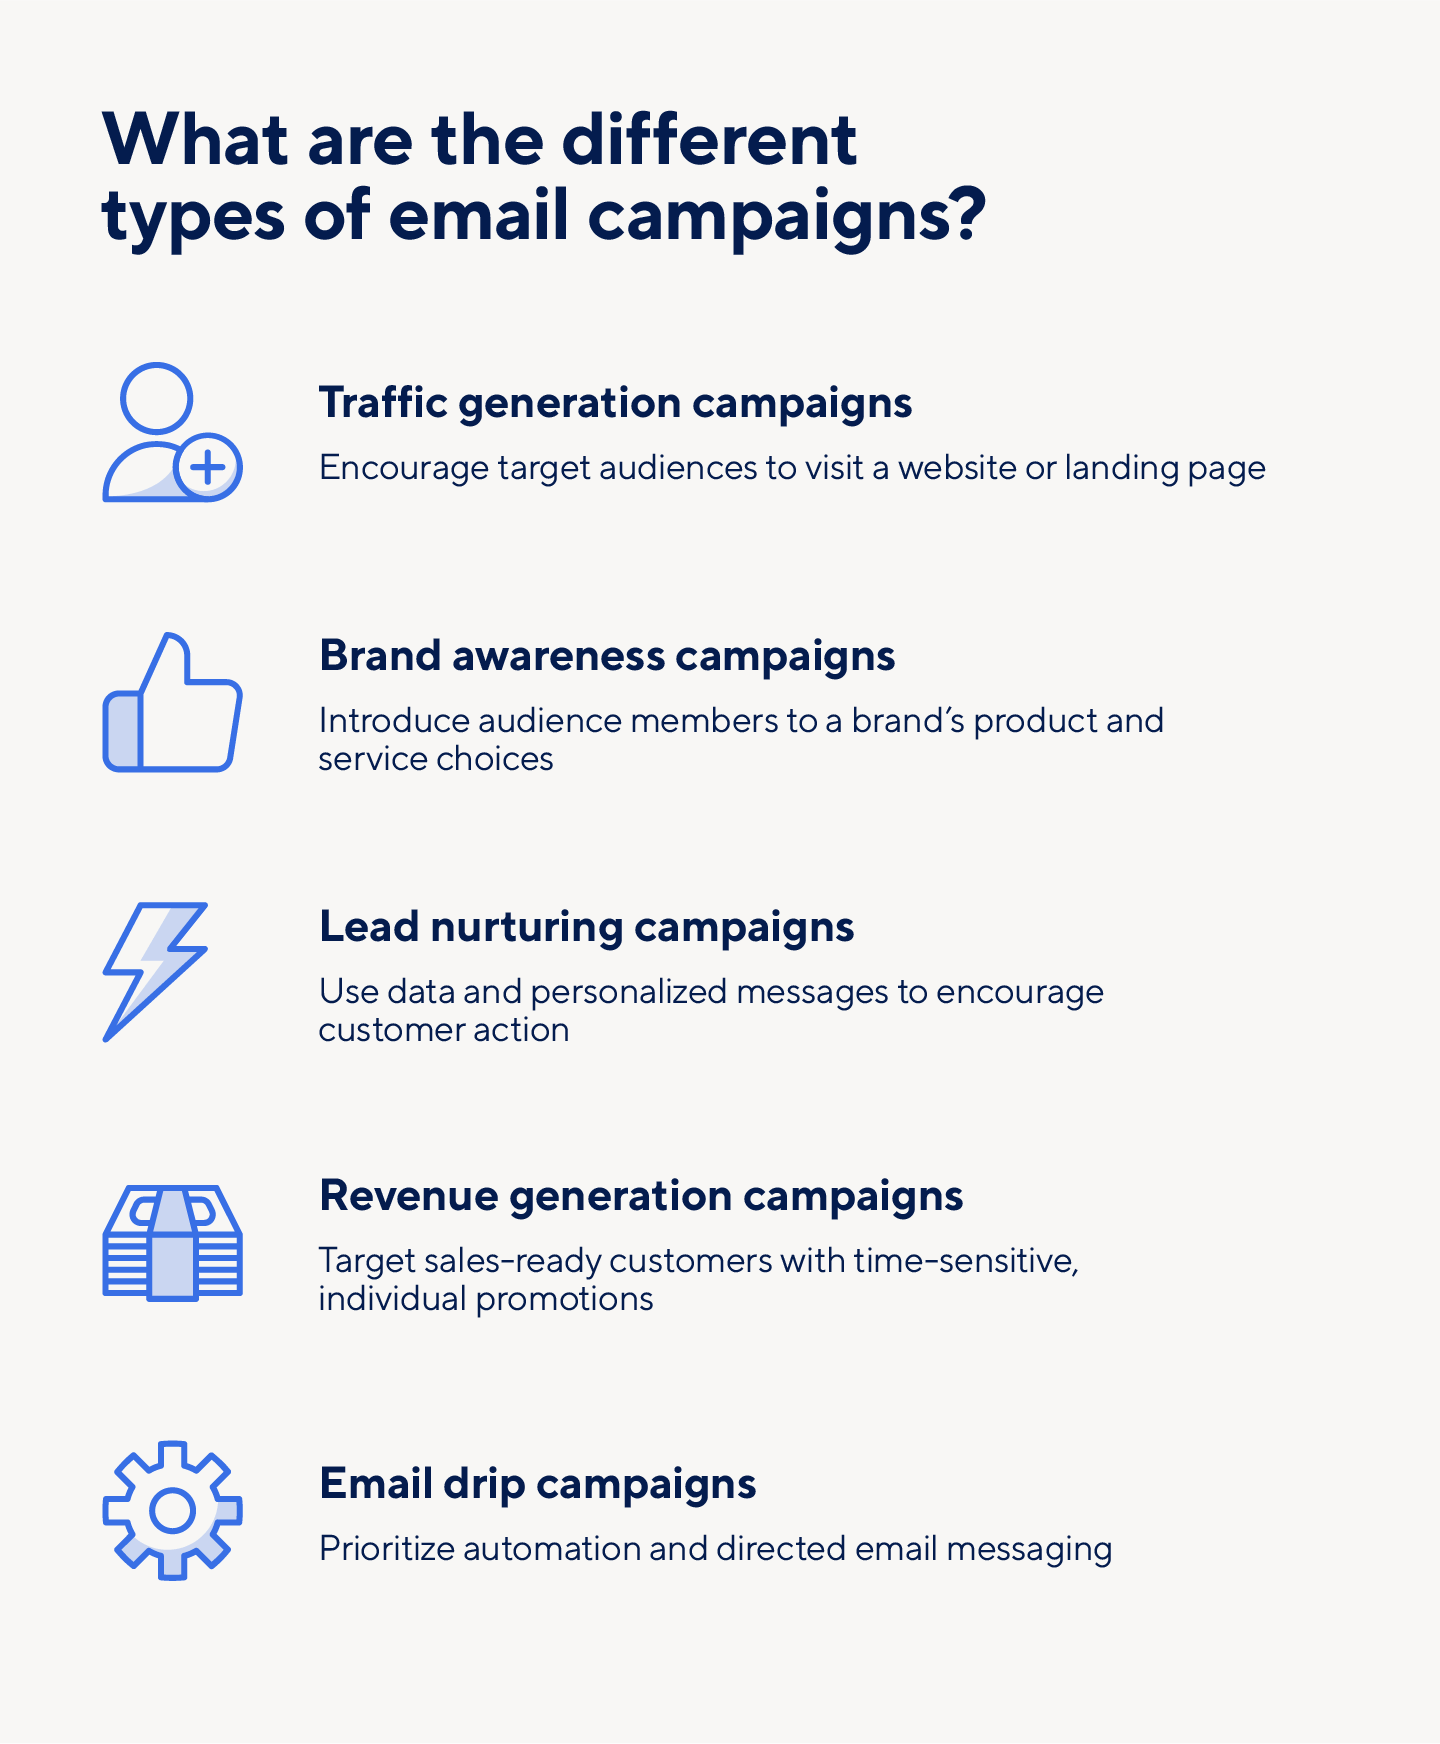 The different types of email campaigns include traffic generation, brand awareness, and lead nurturing, and more.